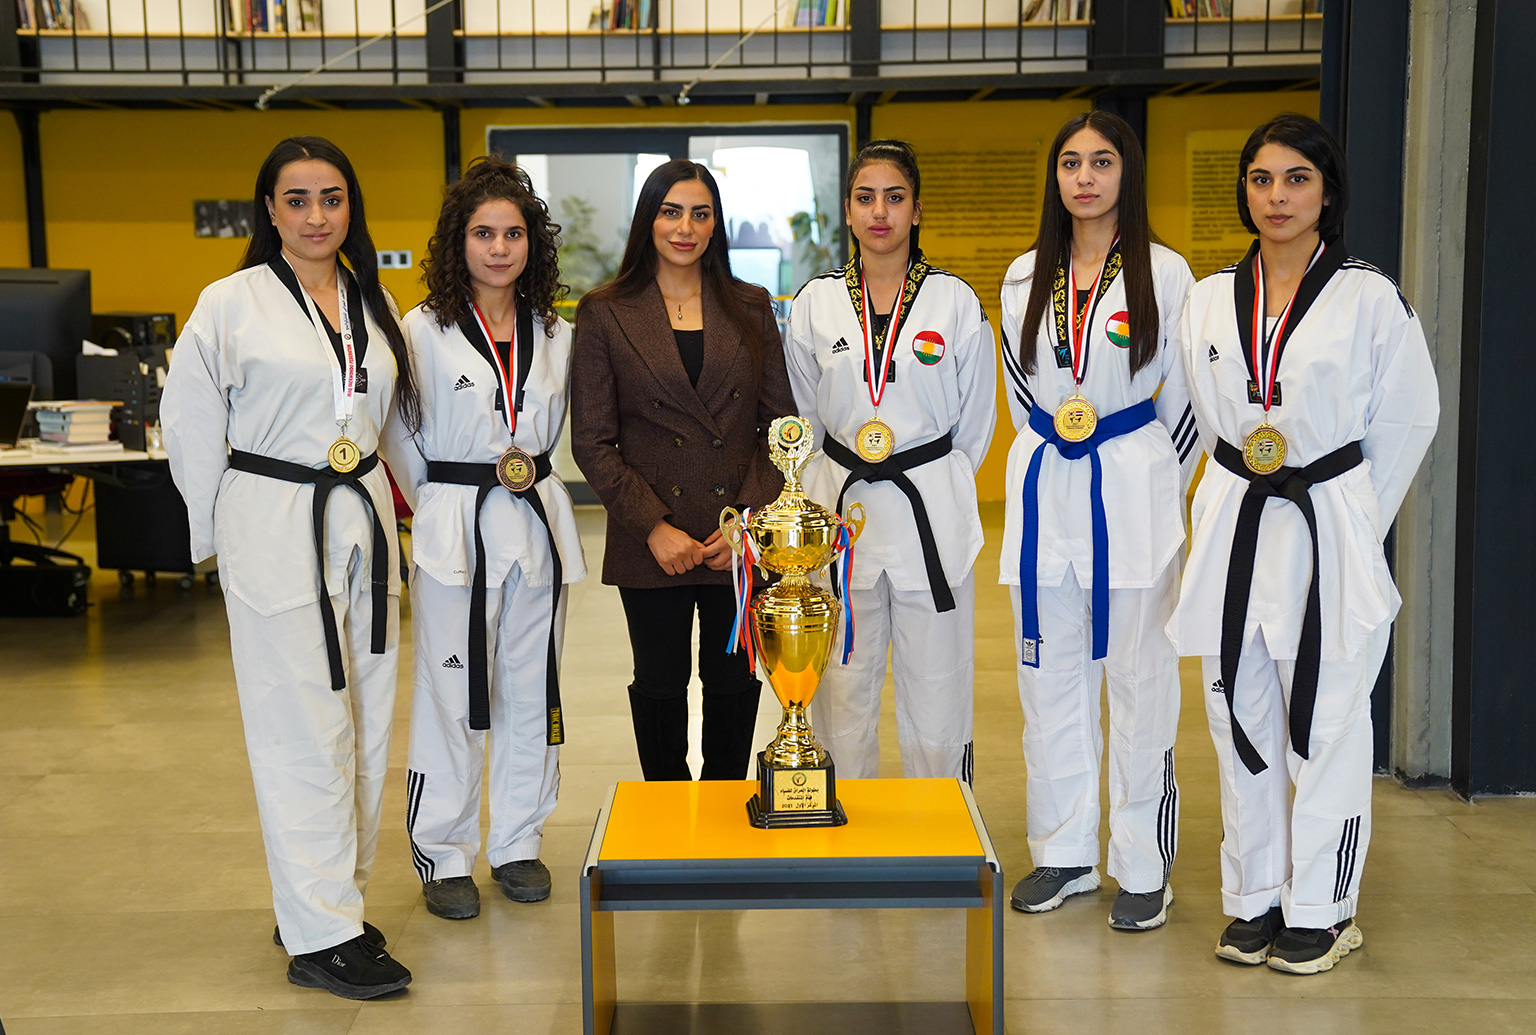 The President of Vim Foundation Honors a Number of Female Athletes